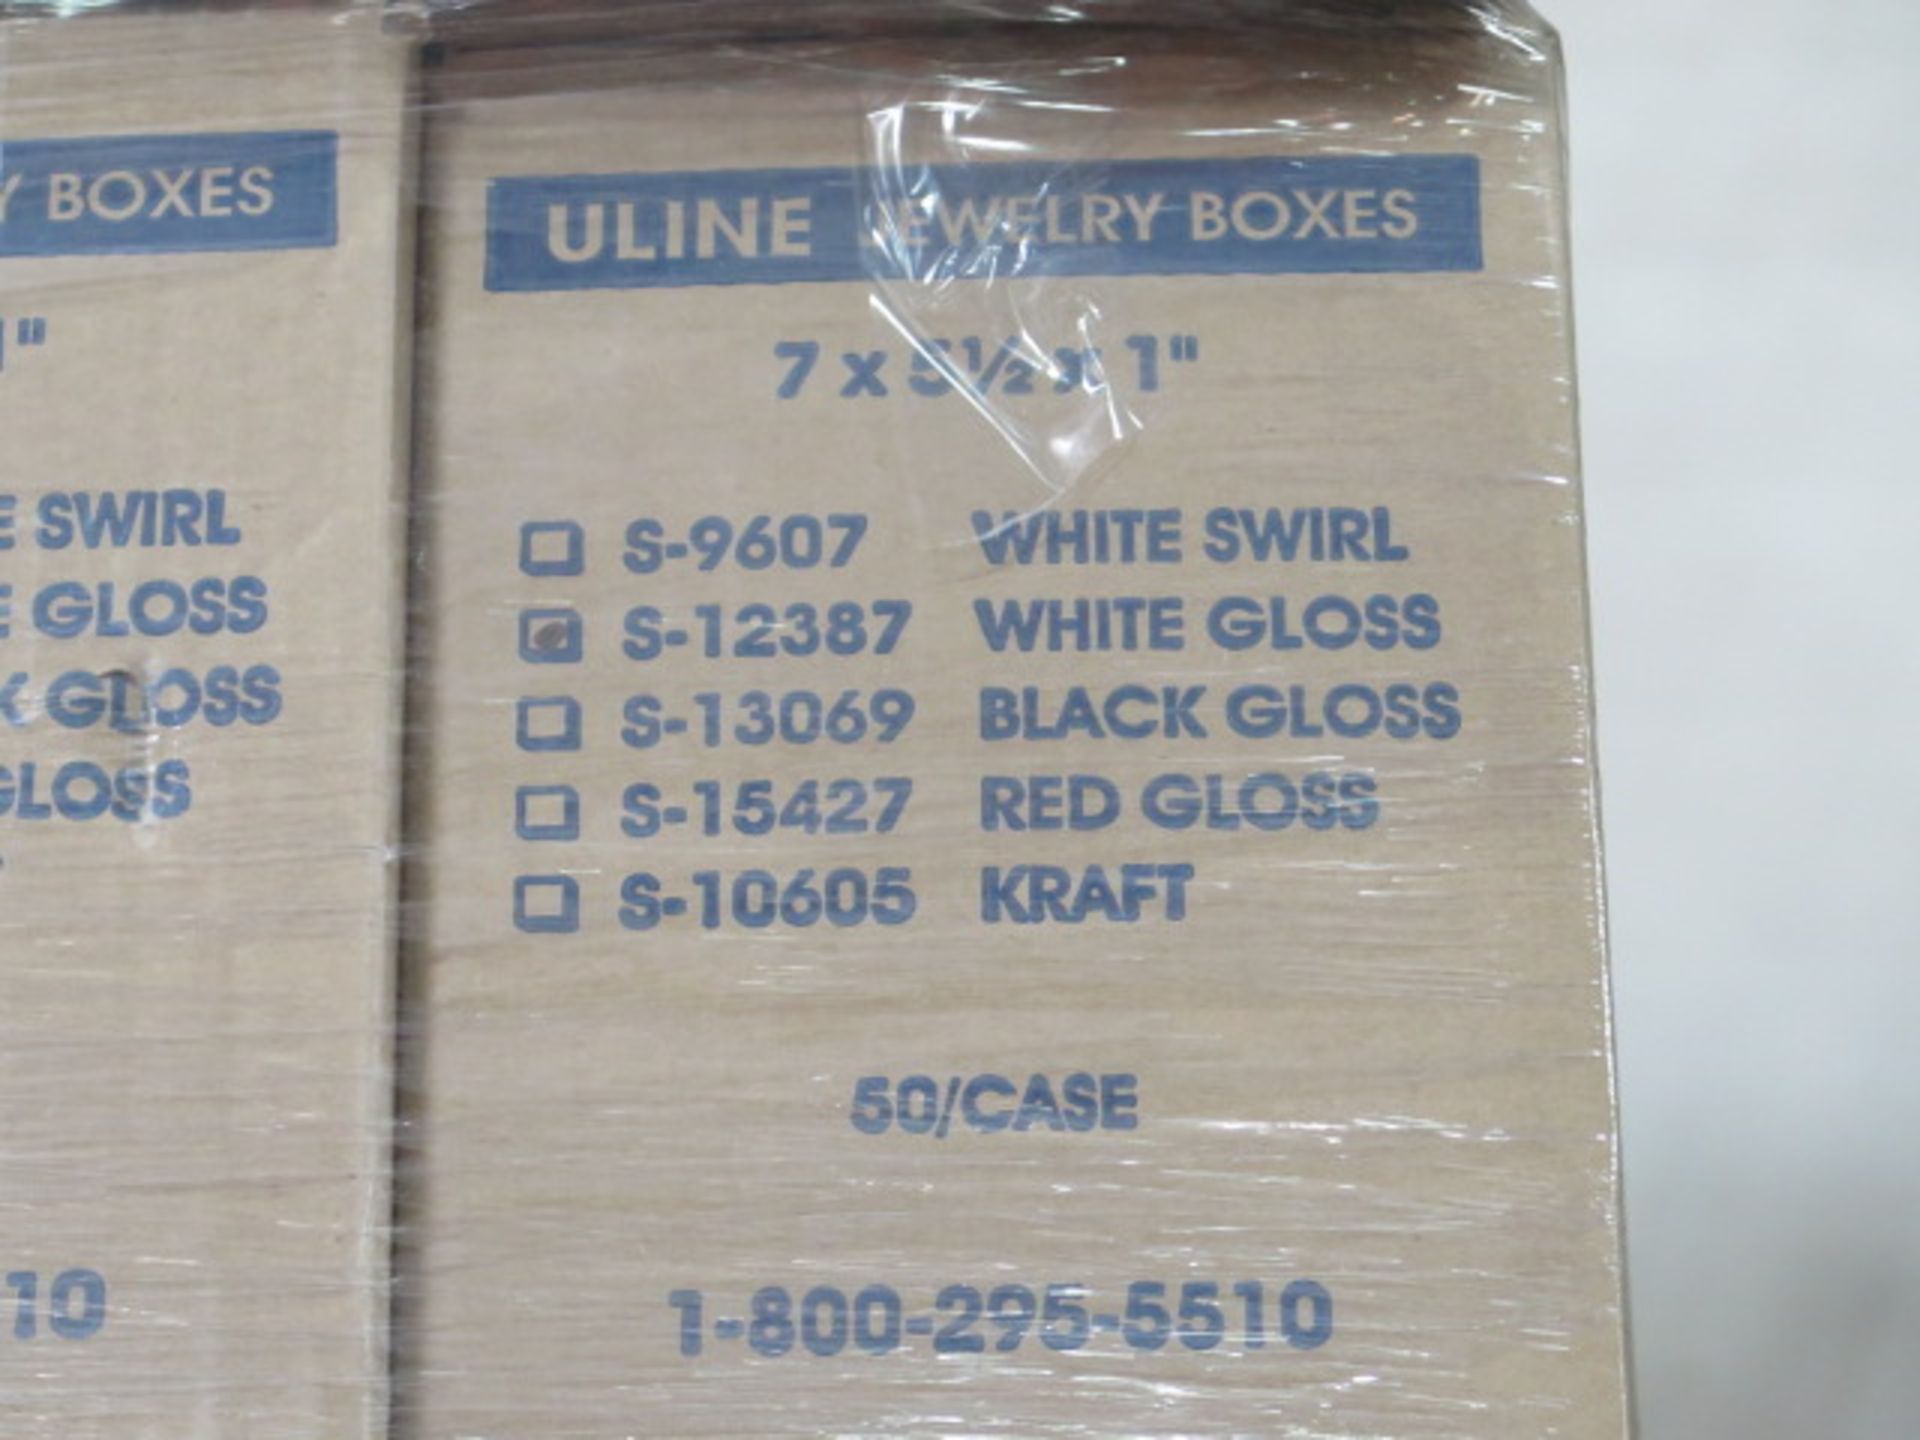 Uline Jewelry Boxes and Misc Boxes (8-Pallets) (SOLD AS-IS - NO WARRANTY) - Image 5 of 16